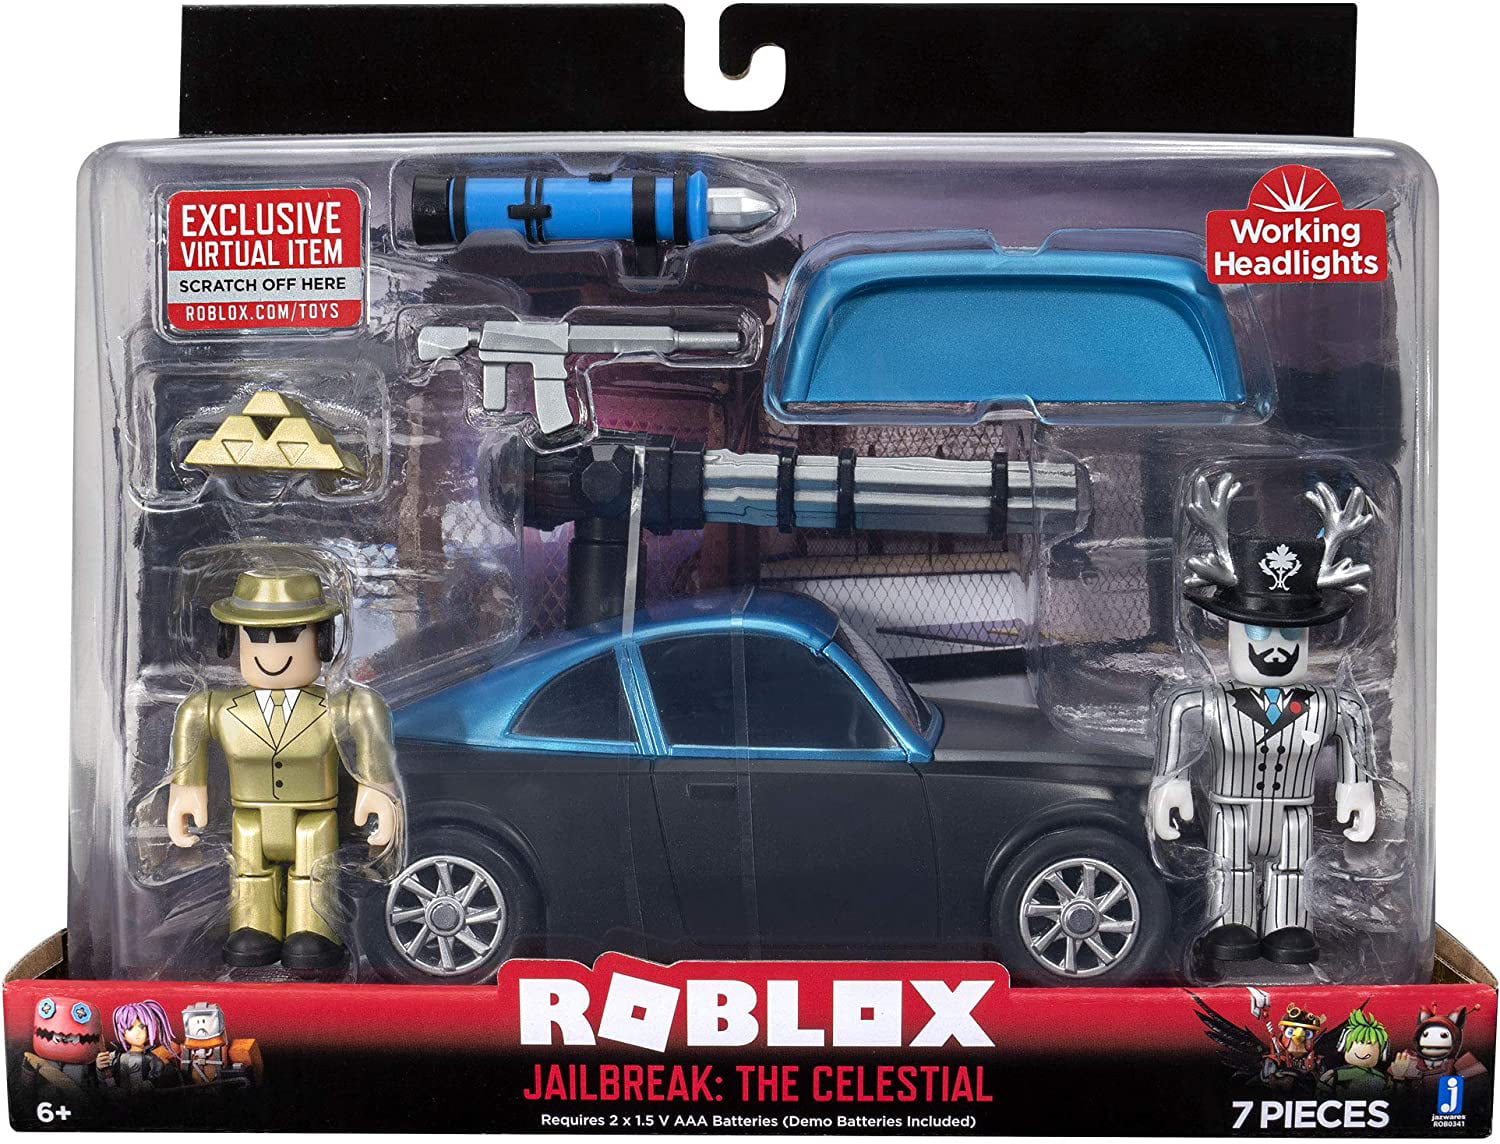 Roblox Action Collection Jailbreak The Celestial Deluxe Vehicle Includes Exclusive Virtual Item Walmart Com Walmart Com - exclusive virtual item roblox.com/toys